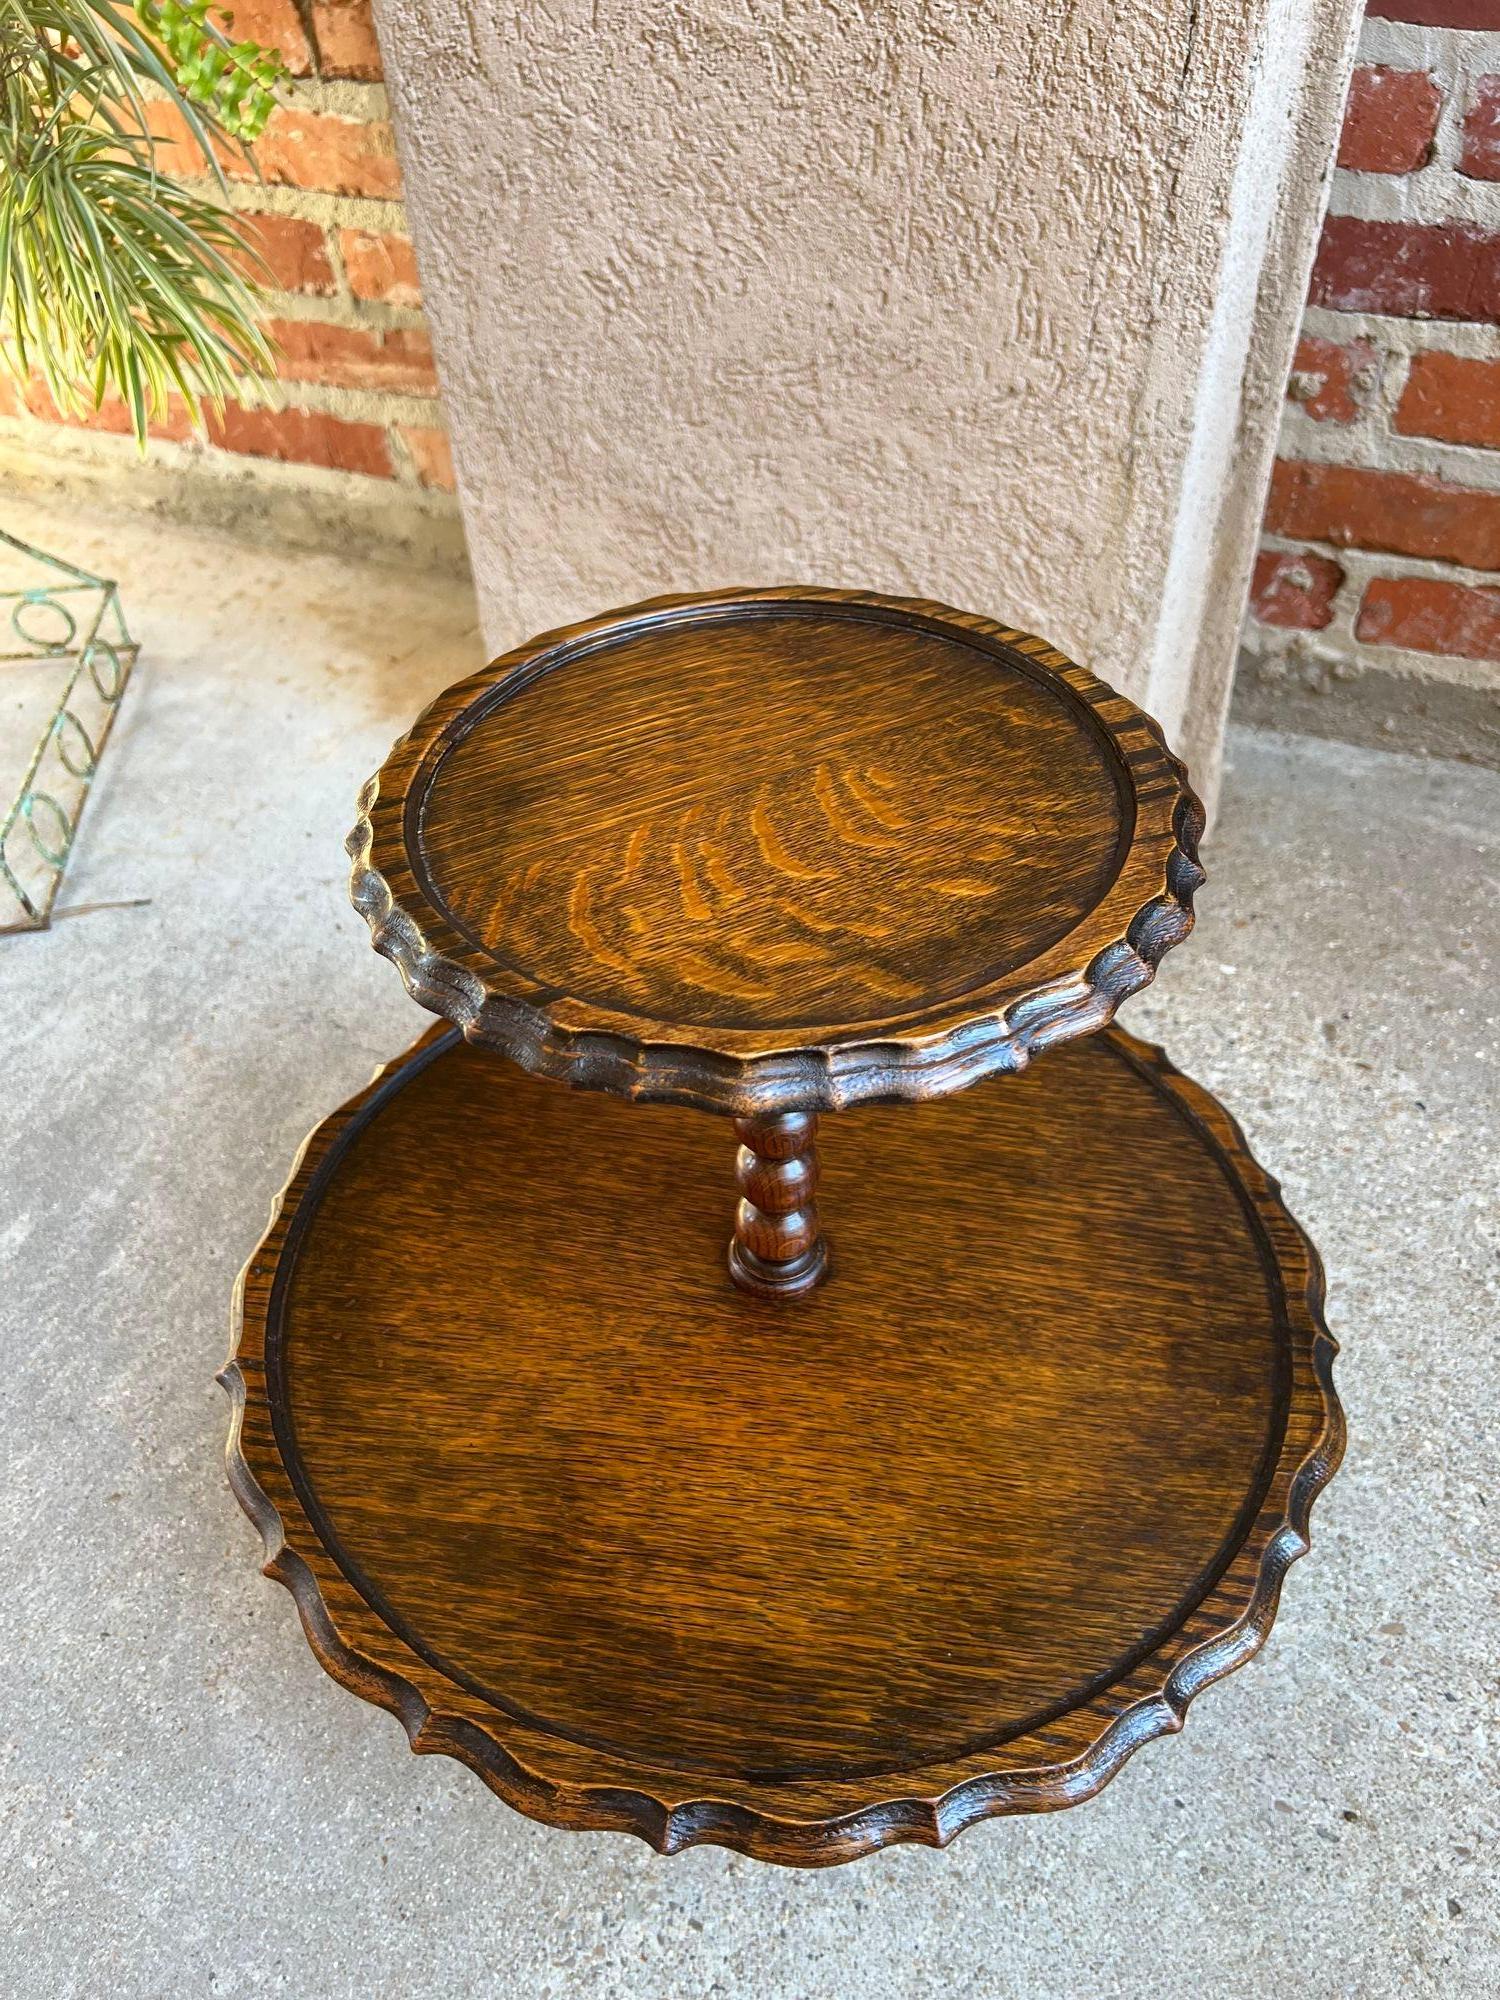 Antique English Revolving Dessert Server Cookie Muffin Display Tea Stand In Good Condition For Sale In Shreveport, LA